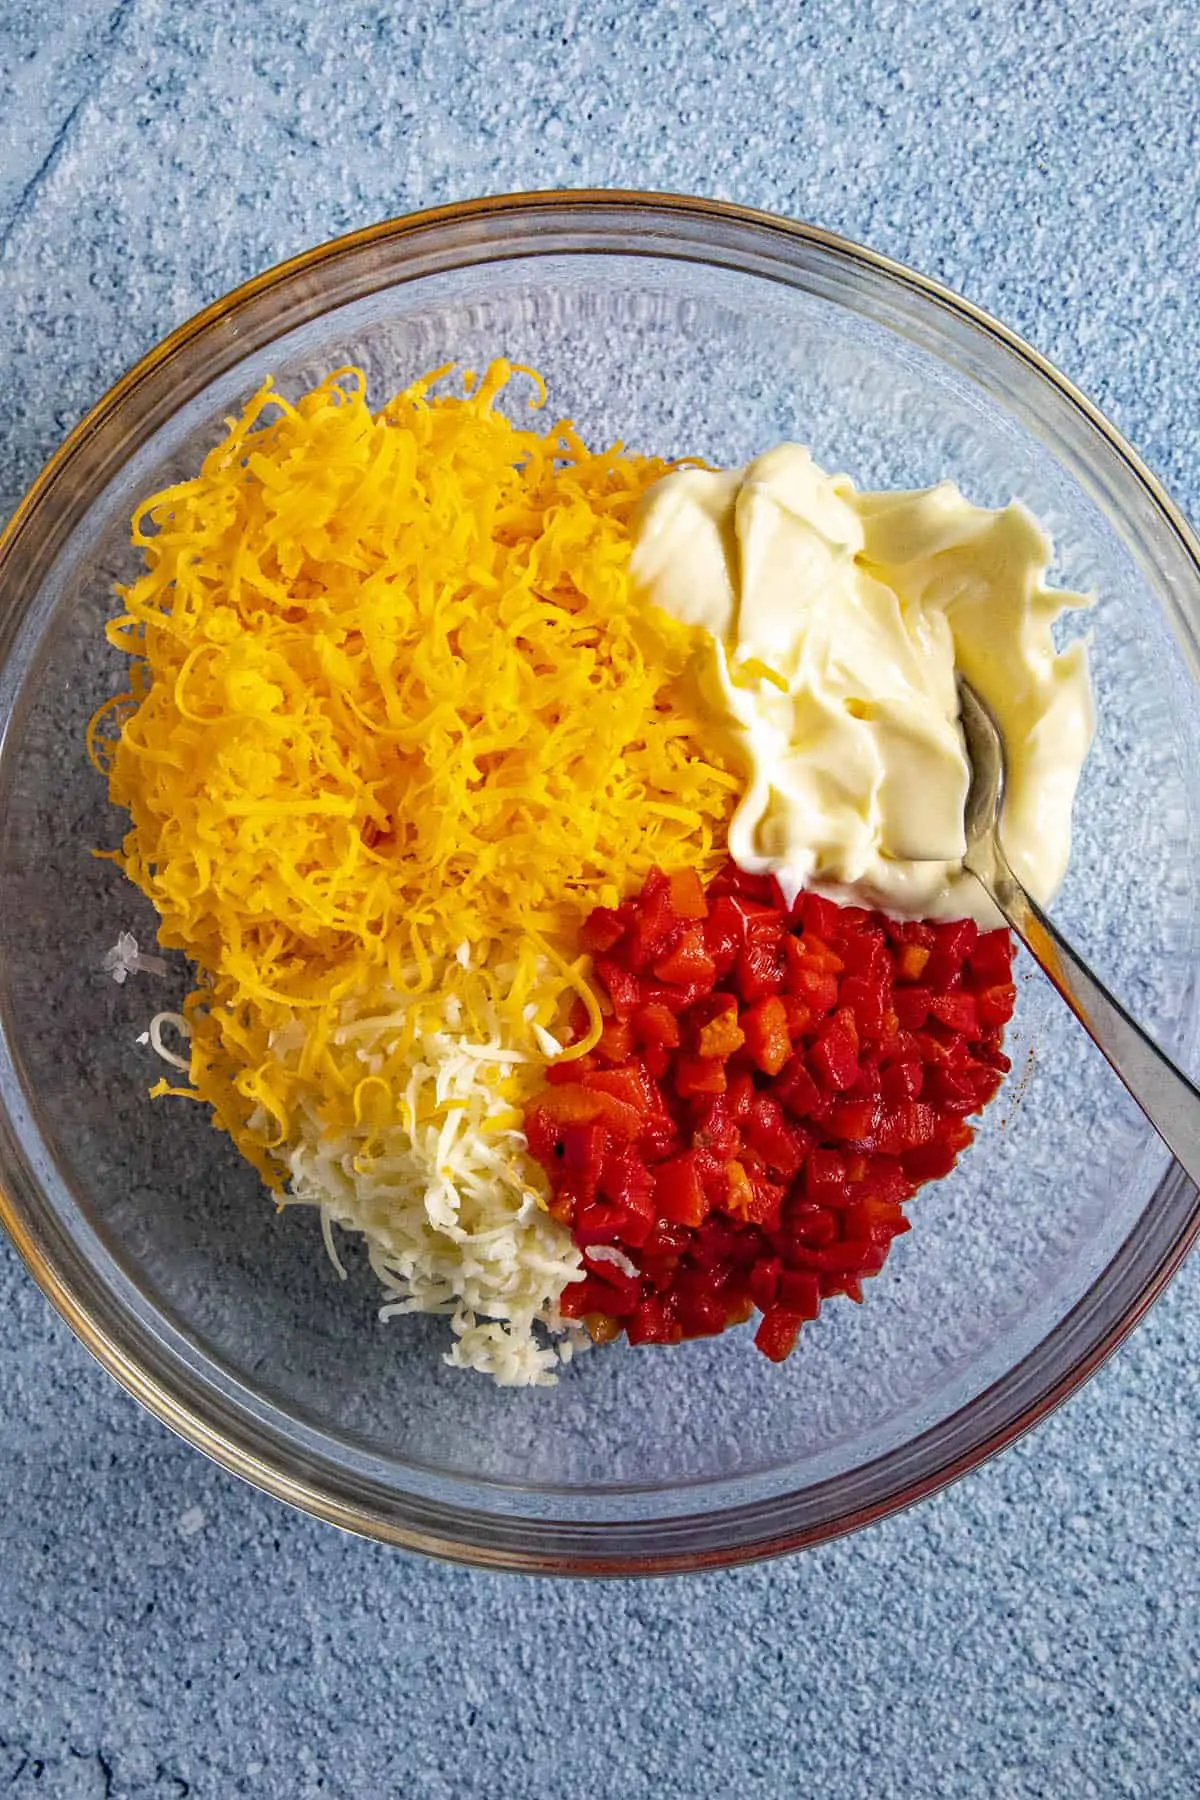 Pimento Cheese ingredients in a mixing bowl